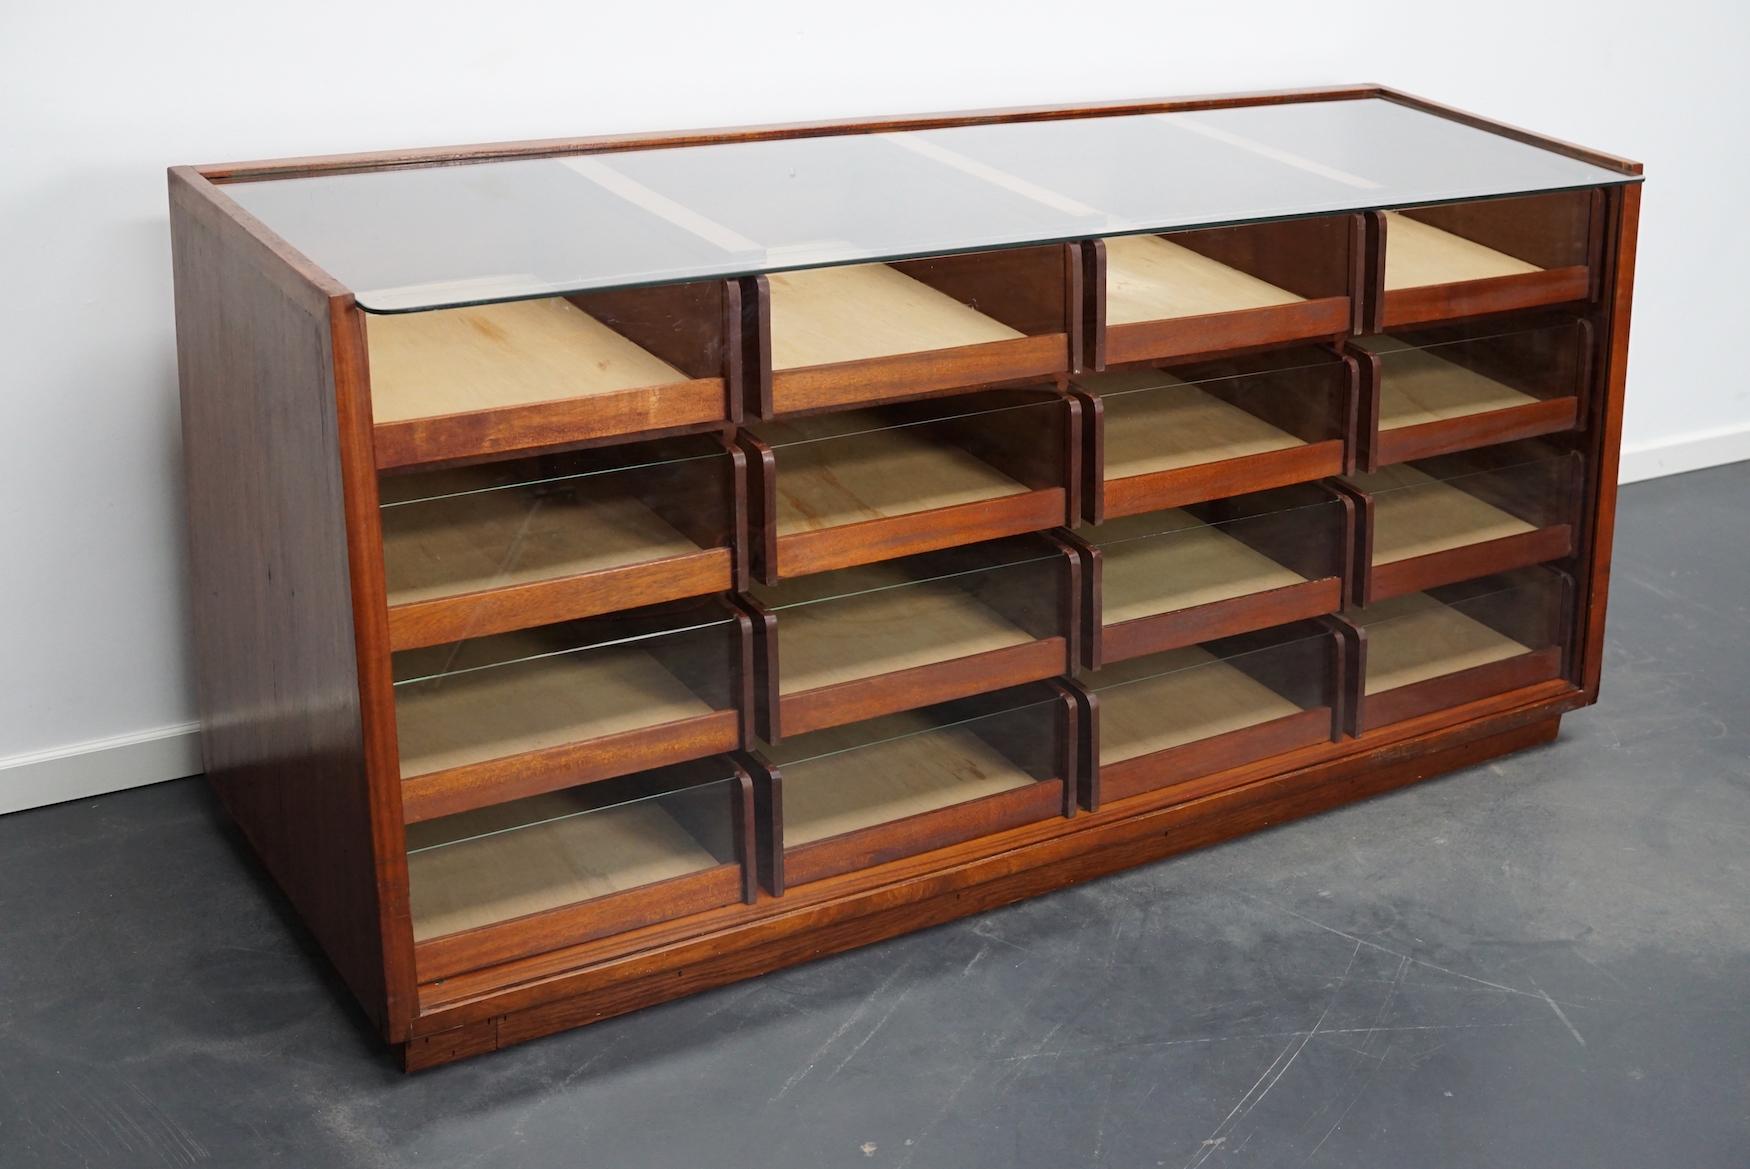 This vintage mahogany haberdashery shop counter dates from the 1950s and was made in England. It features a solid frame, glass casing and drawers in mahogany with brass handles. The drawers measure +- DWH 47 x 39 x 13 cm.